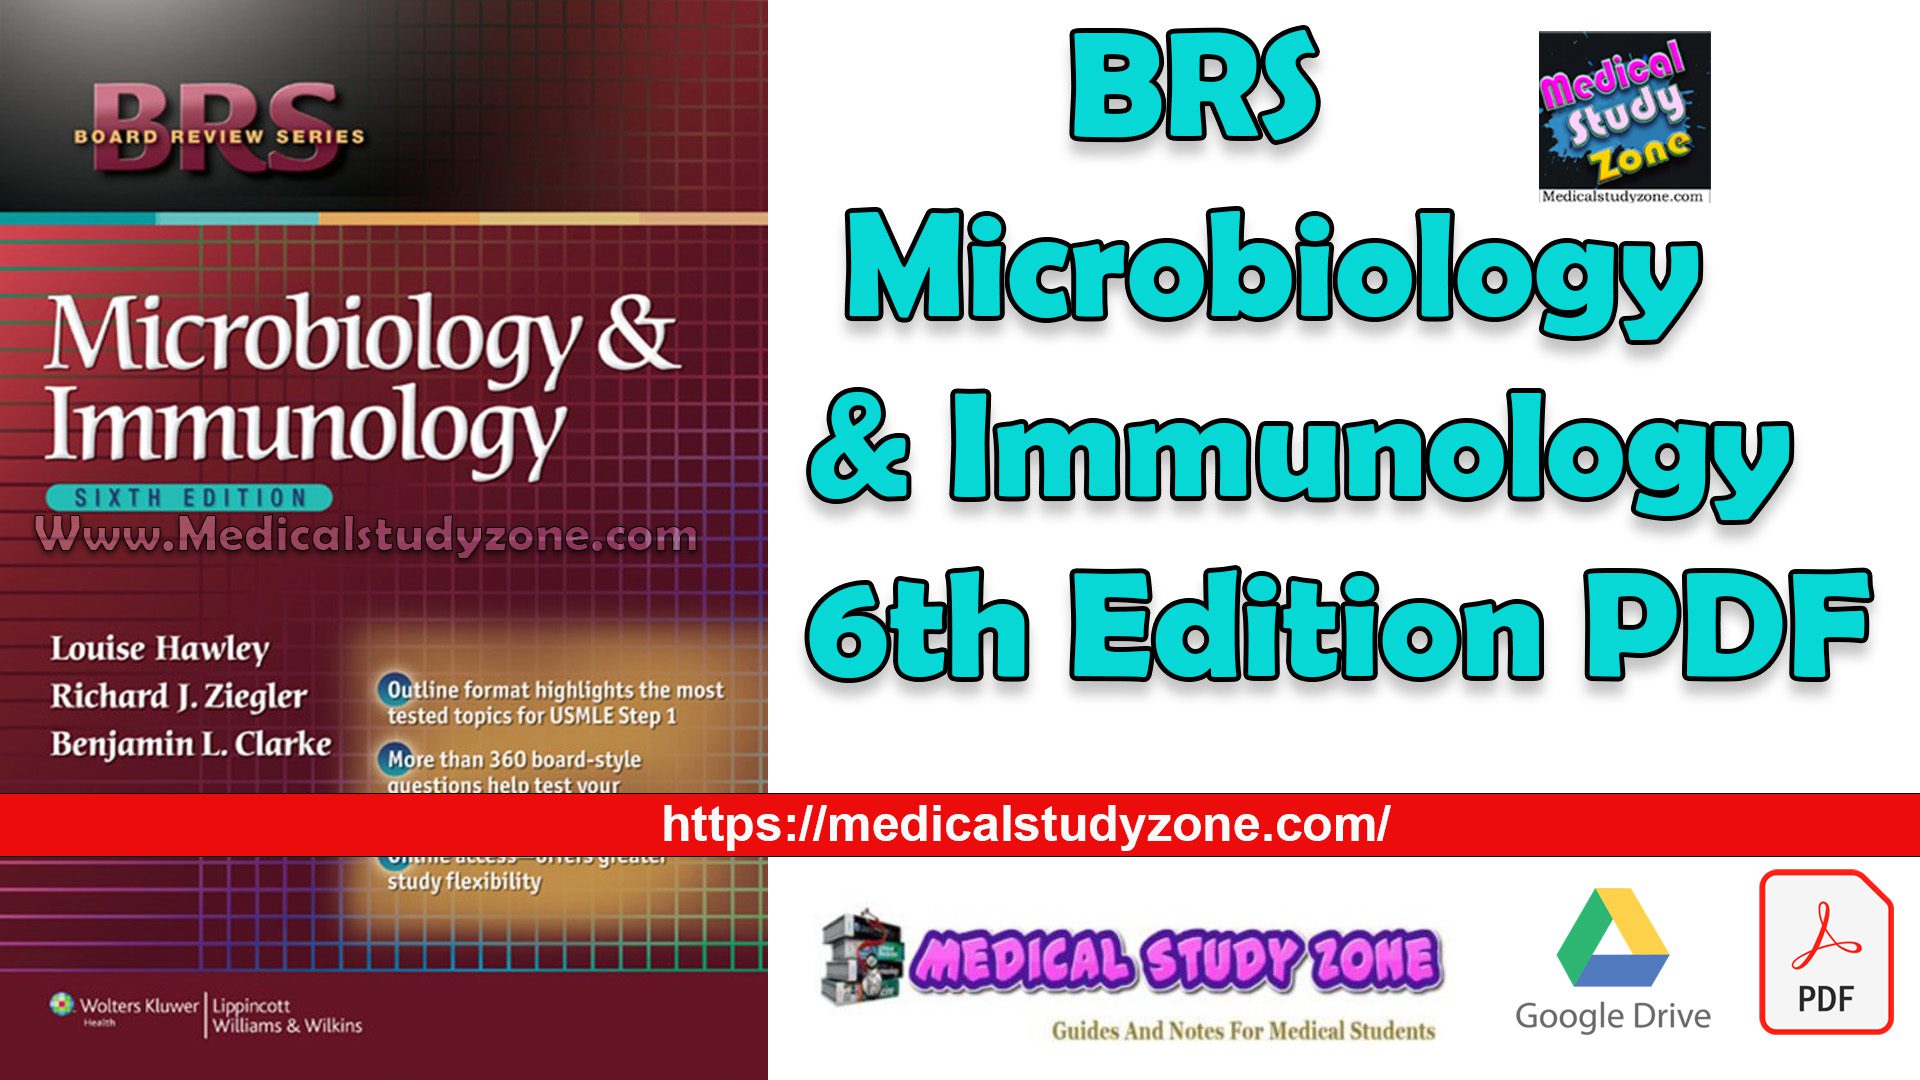 BRS Microbiology and Immunology 6th Edition PDF Free Download